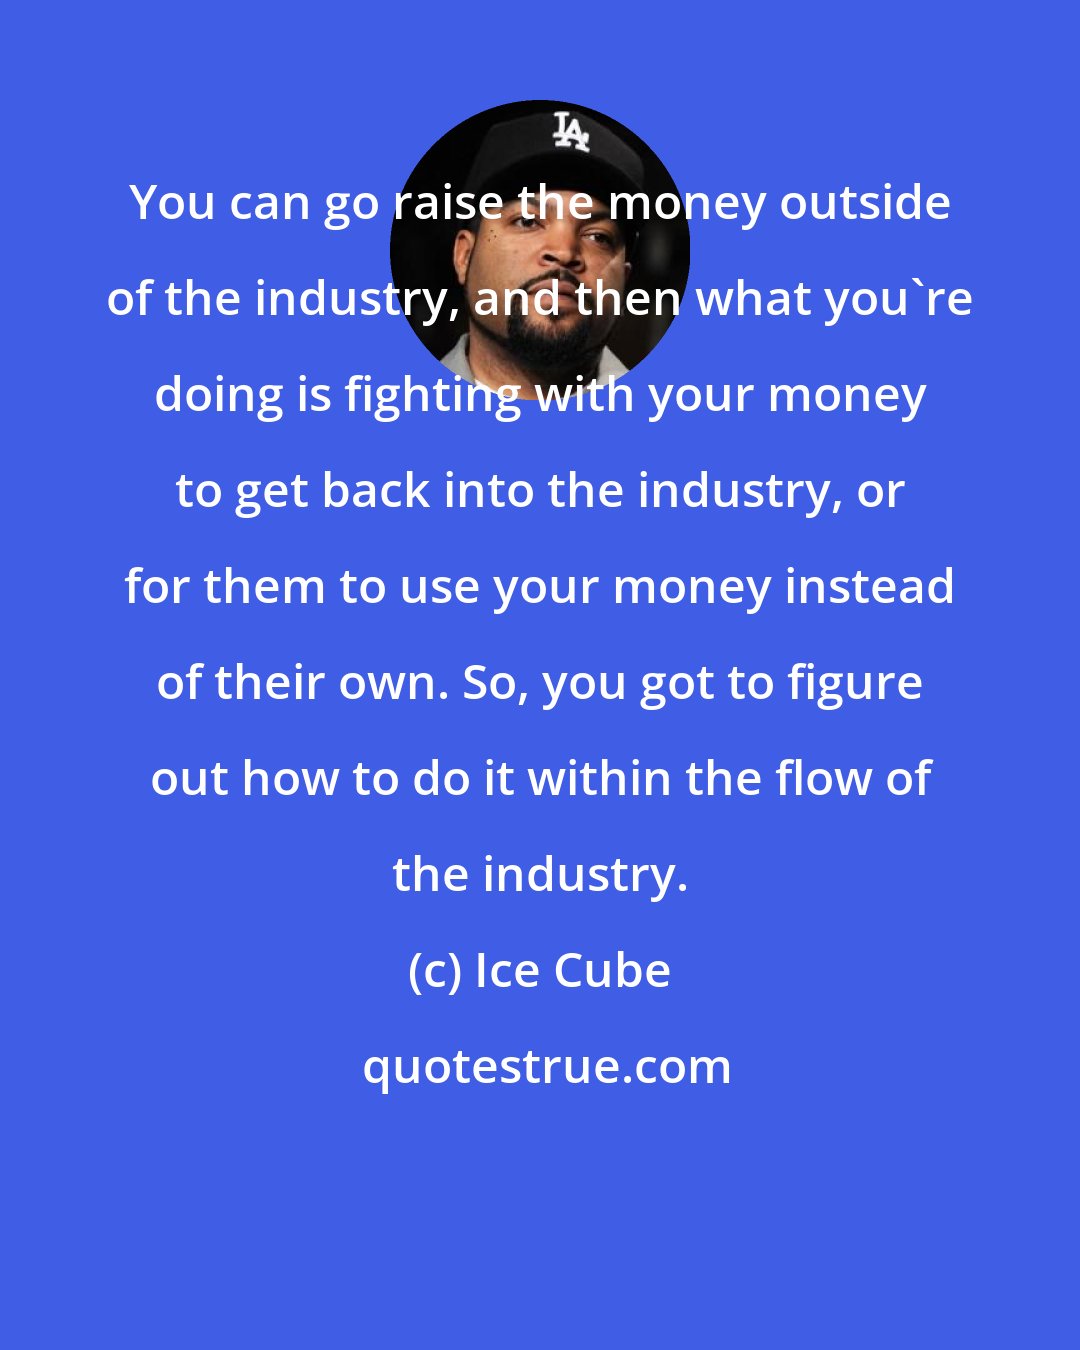 Ice Cube: You can go raise the money outside of the industry, and then what you're doing is fighting with your money to get back into the industry, or for them to use your money instead of their own. So, you got to figure out how to do it within the flow of the industry.